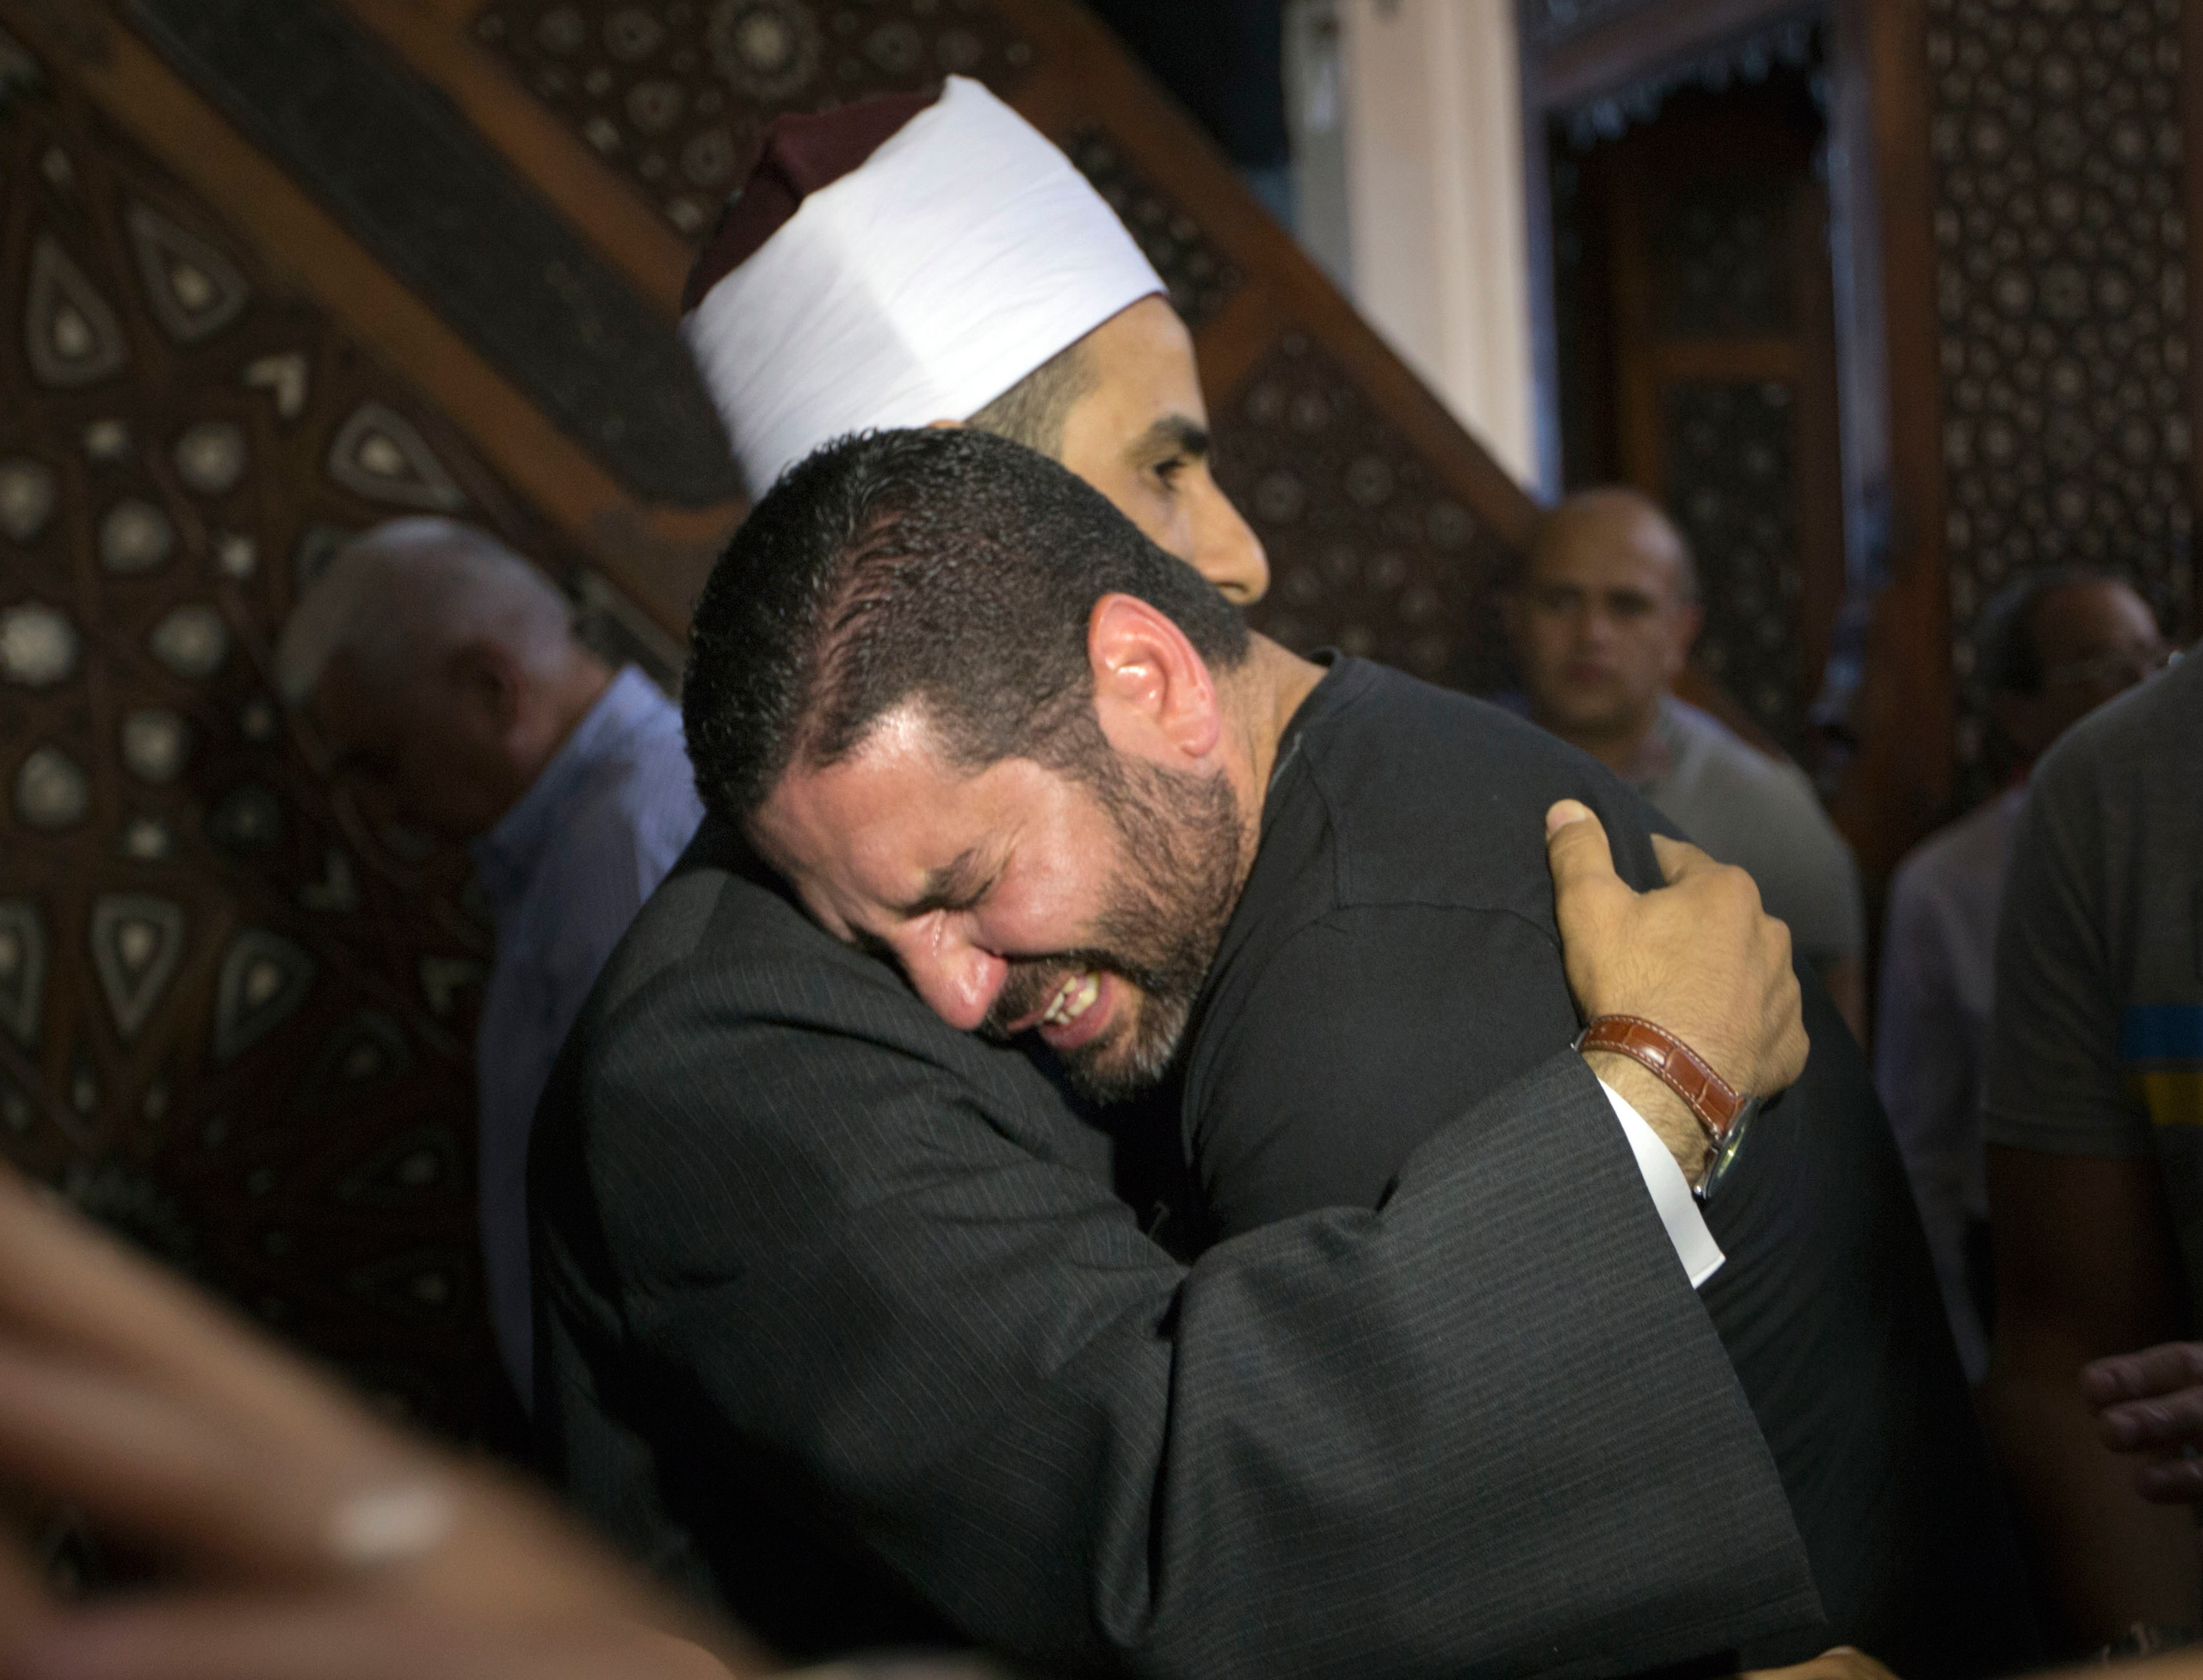 The Imam of al Thawrah Mosque, Samir Abdel Bary, gives condolences to film director Osman Abu Laban, center, who lost four relatives, all victims of Thursday's EgyptAir plane crash, following prayers for the dead at al Thawrah Mosque in Cairo on May 20, 2016. (Amr Nabil—AP)